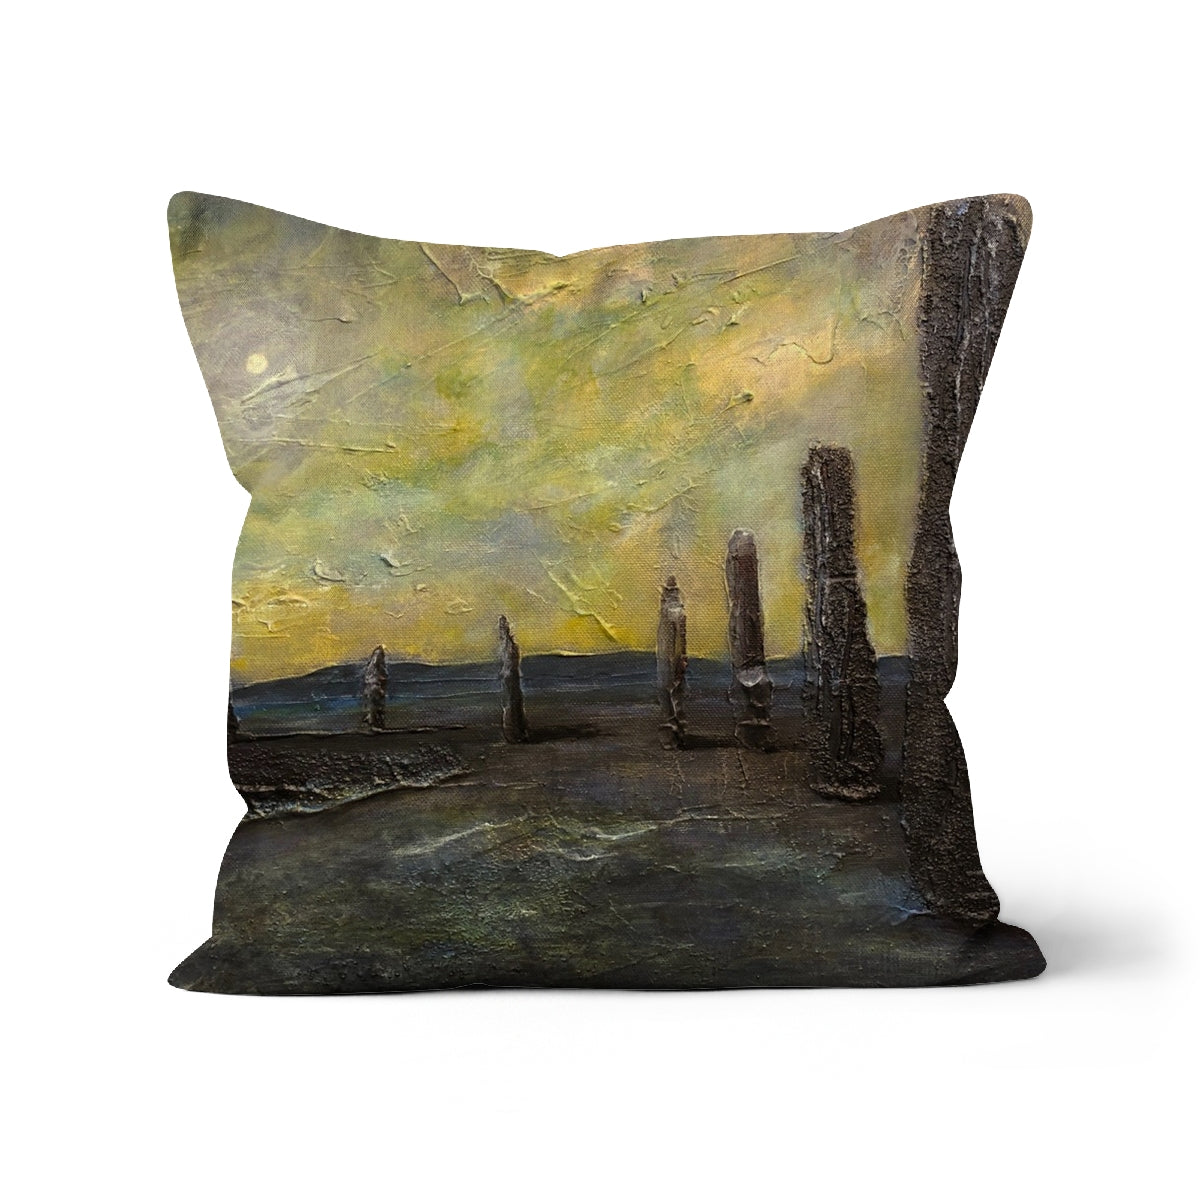 An Ethereal Ring Of Brodgar Art Gifts Cushion-Cushions-Orkney Art Gallery-Linen-22"x22"-Paintings, Prints, Homeware, Art Gifts From Scotland By Scottish Artist Kevin Hunter